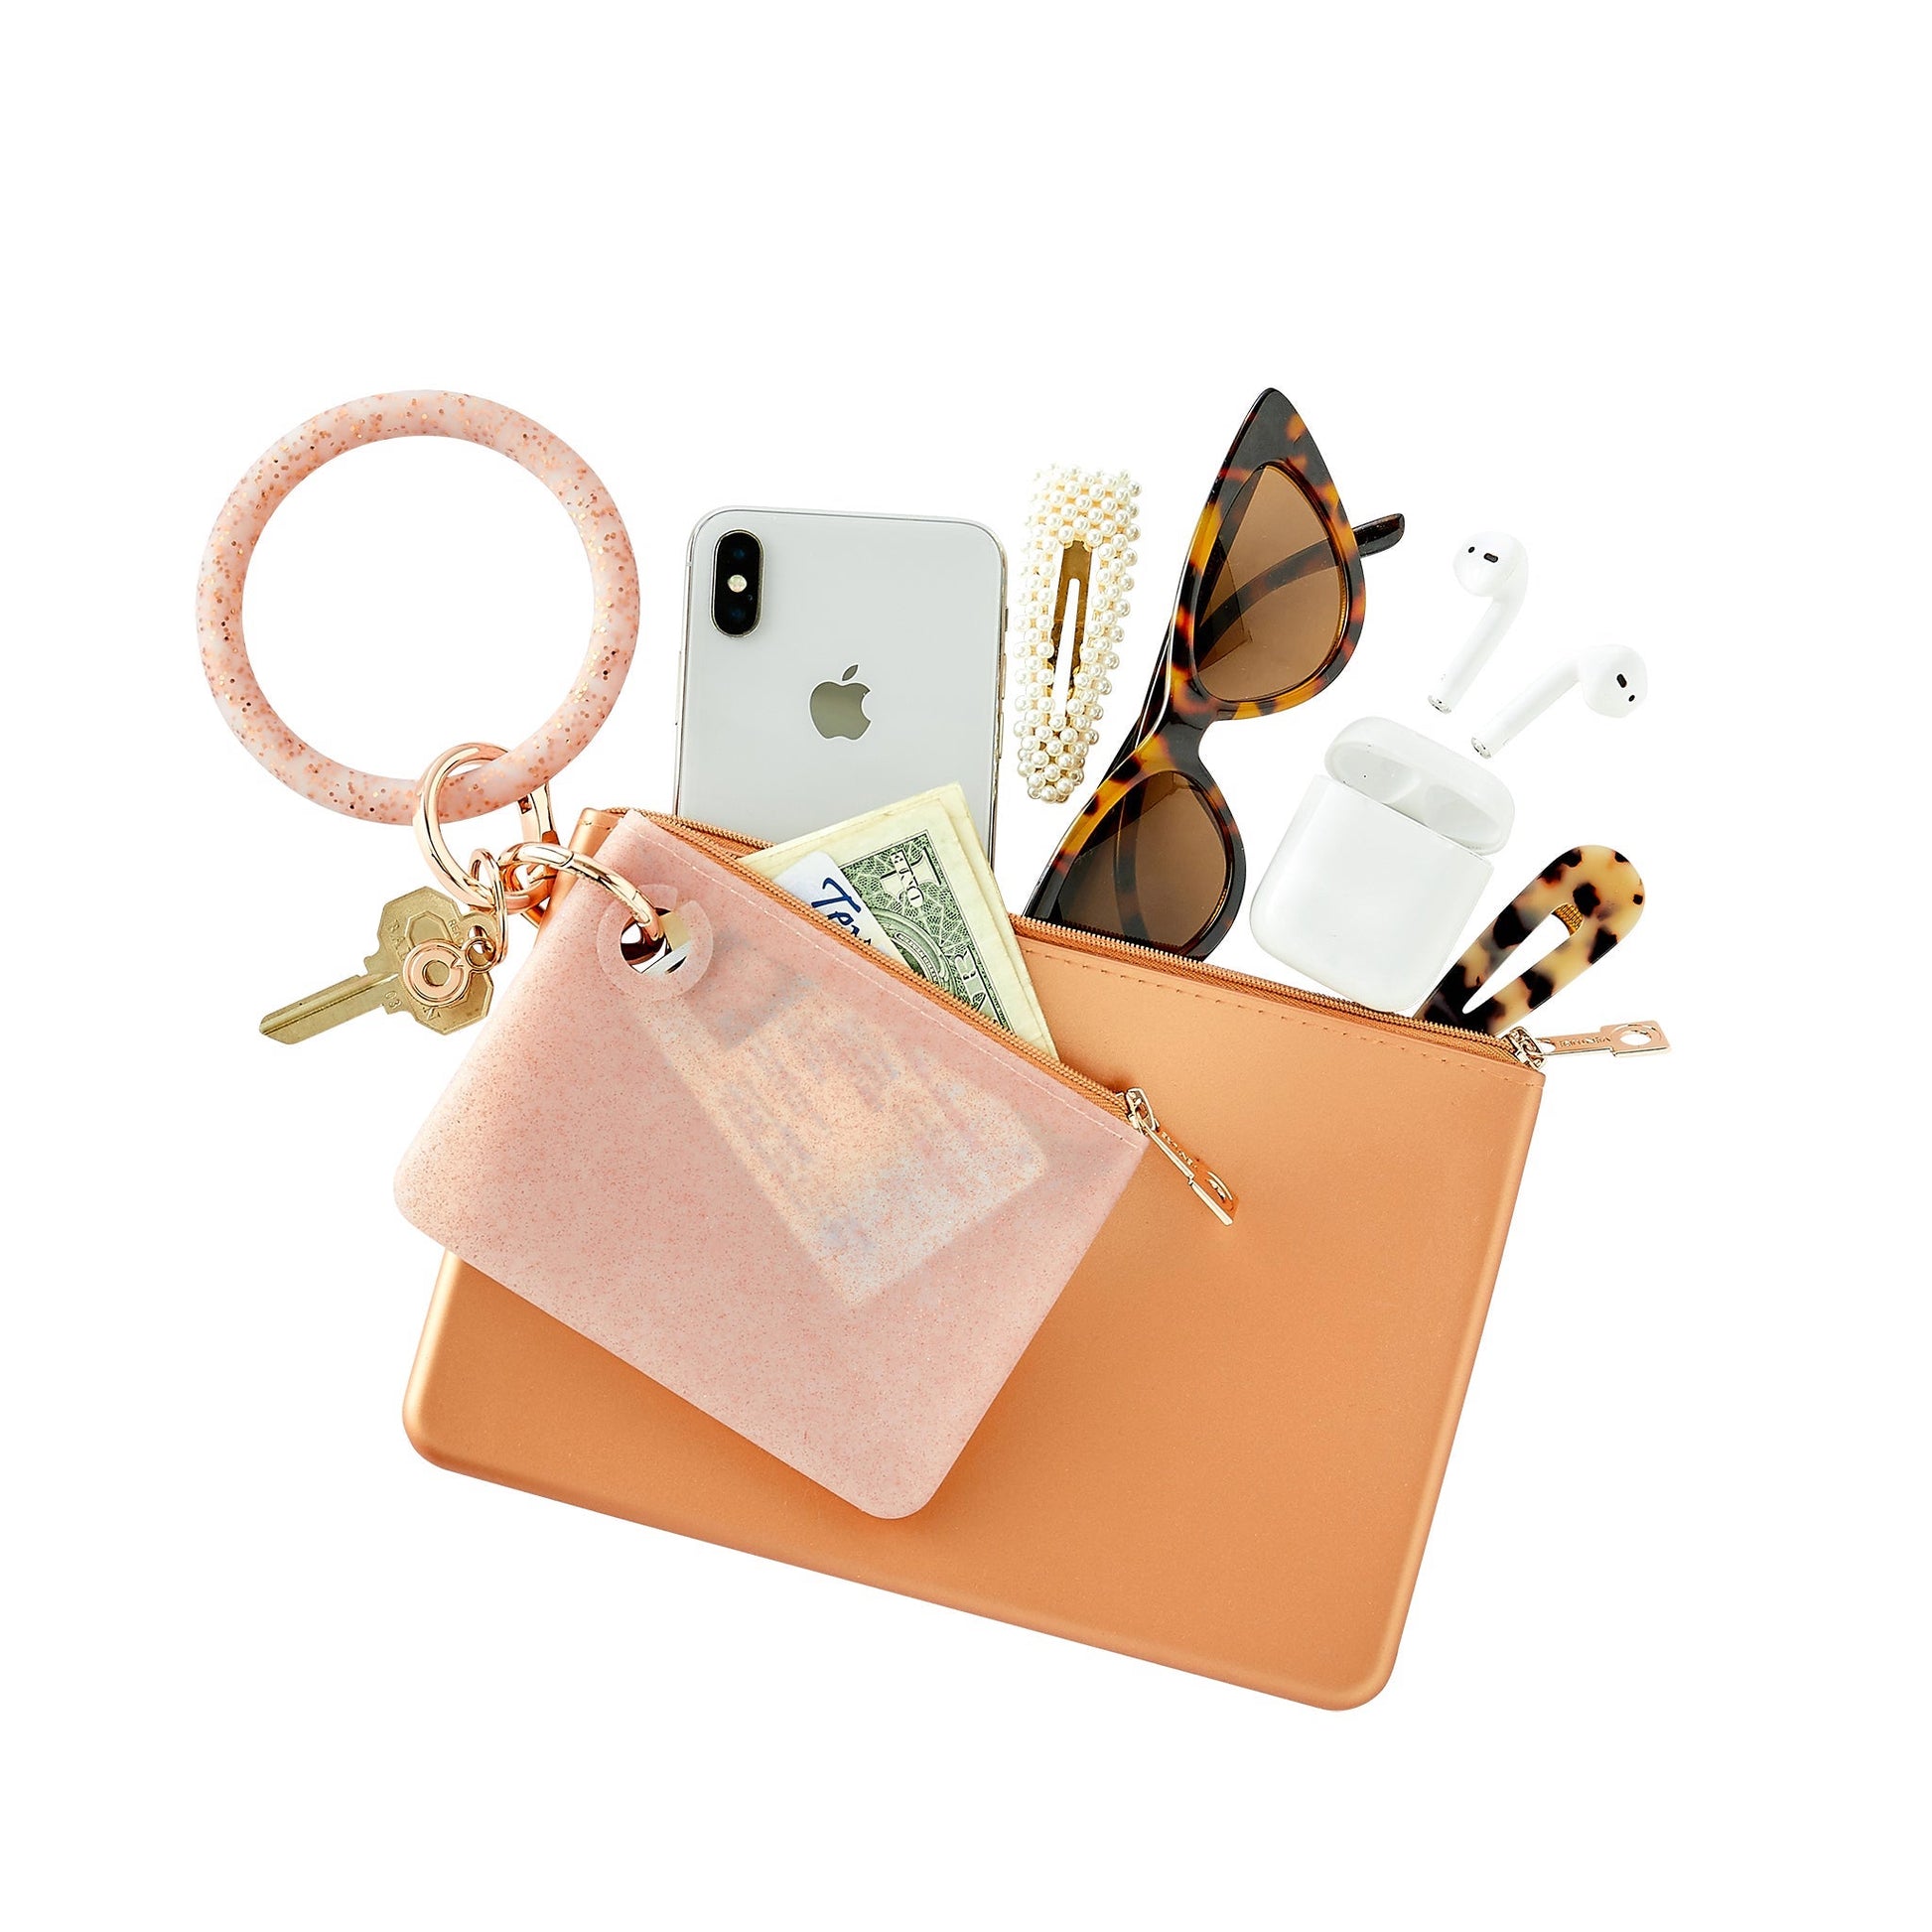 Rose gold confetti silicone big o key ring with matching rose gold confetti pouch and large pouch layered.